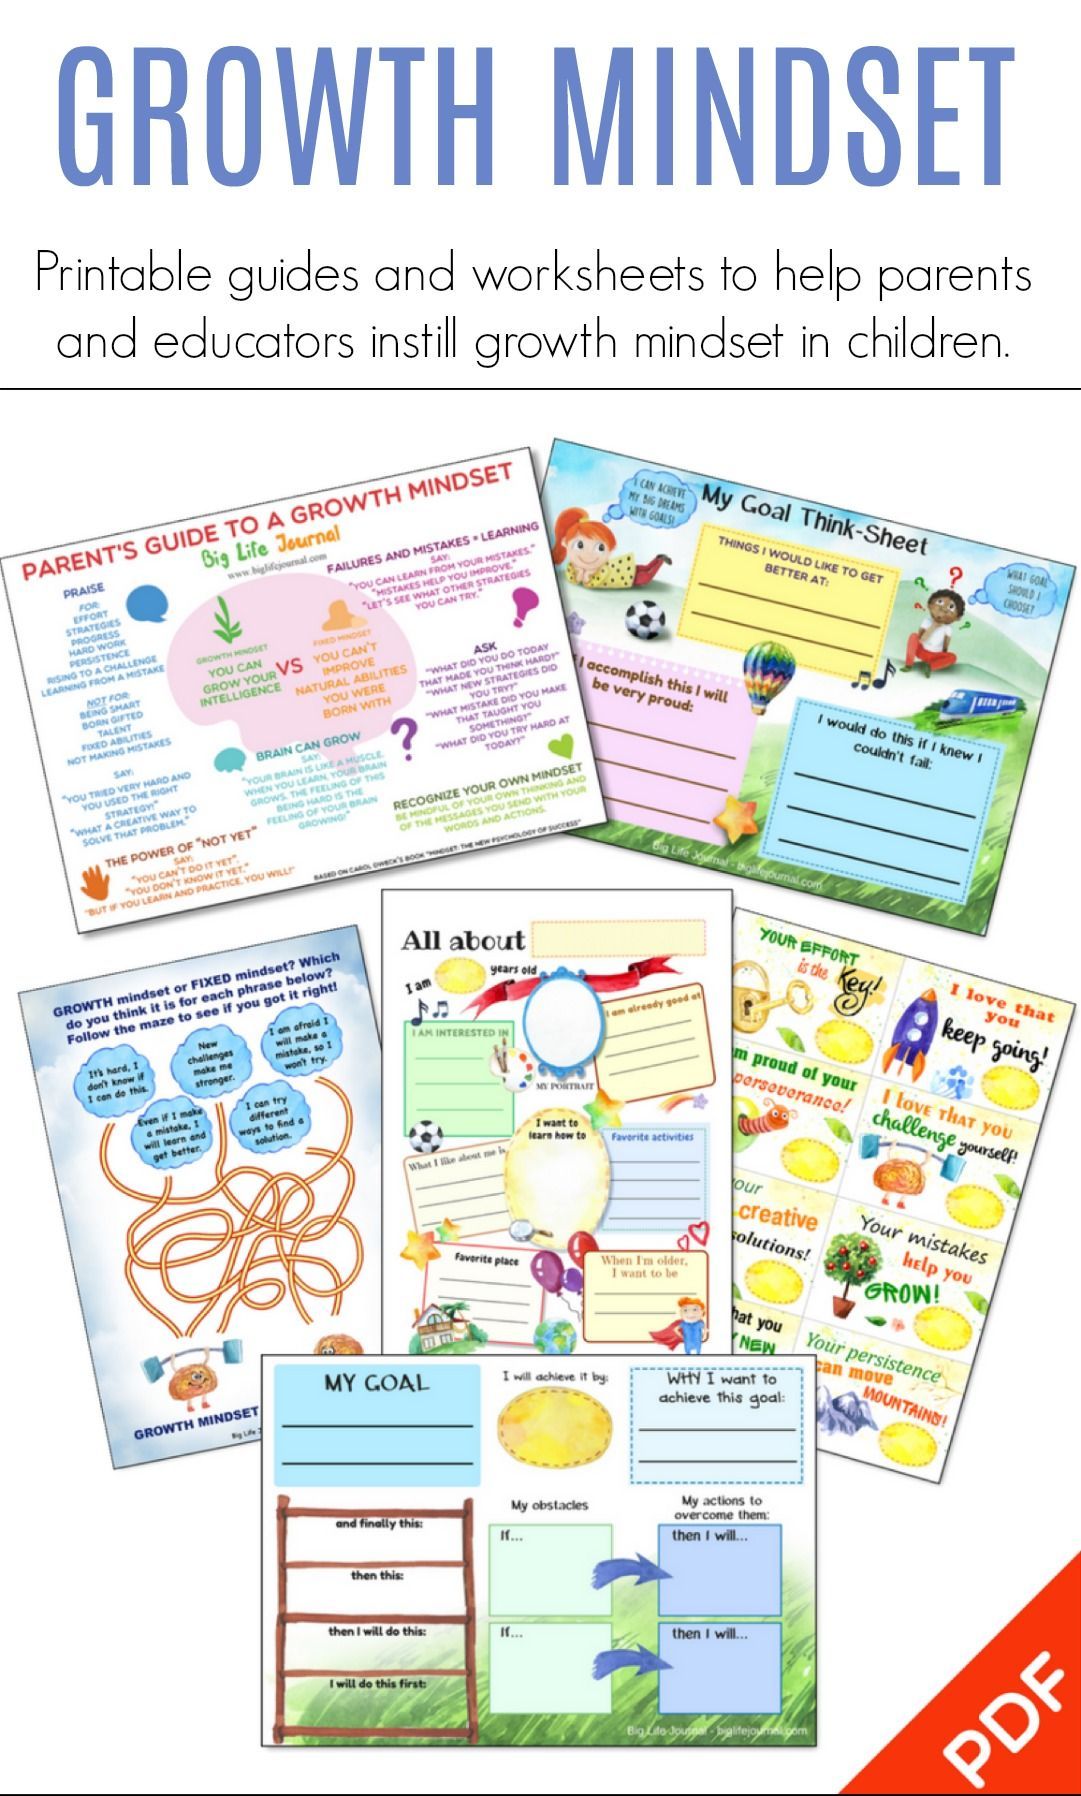 This is a set of 25 growth mindset printable guides and worksheets